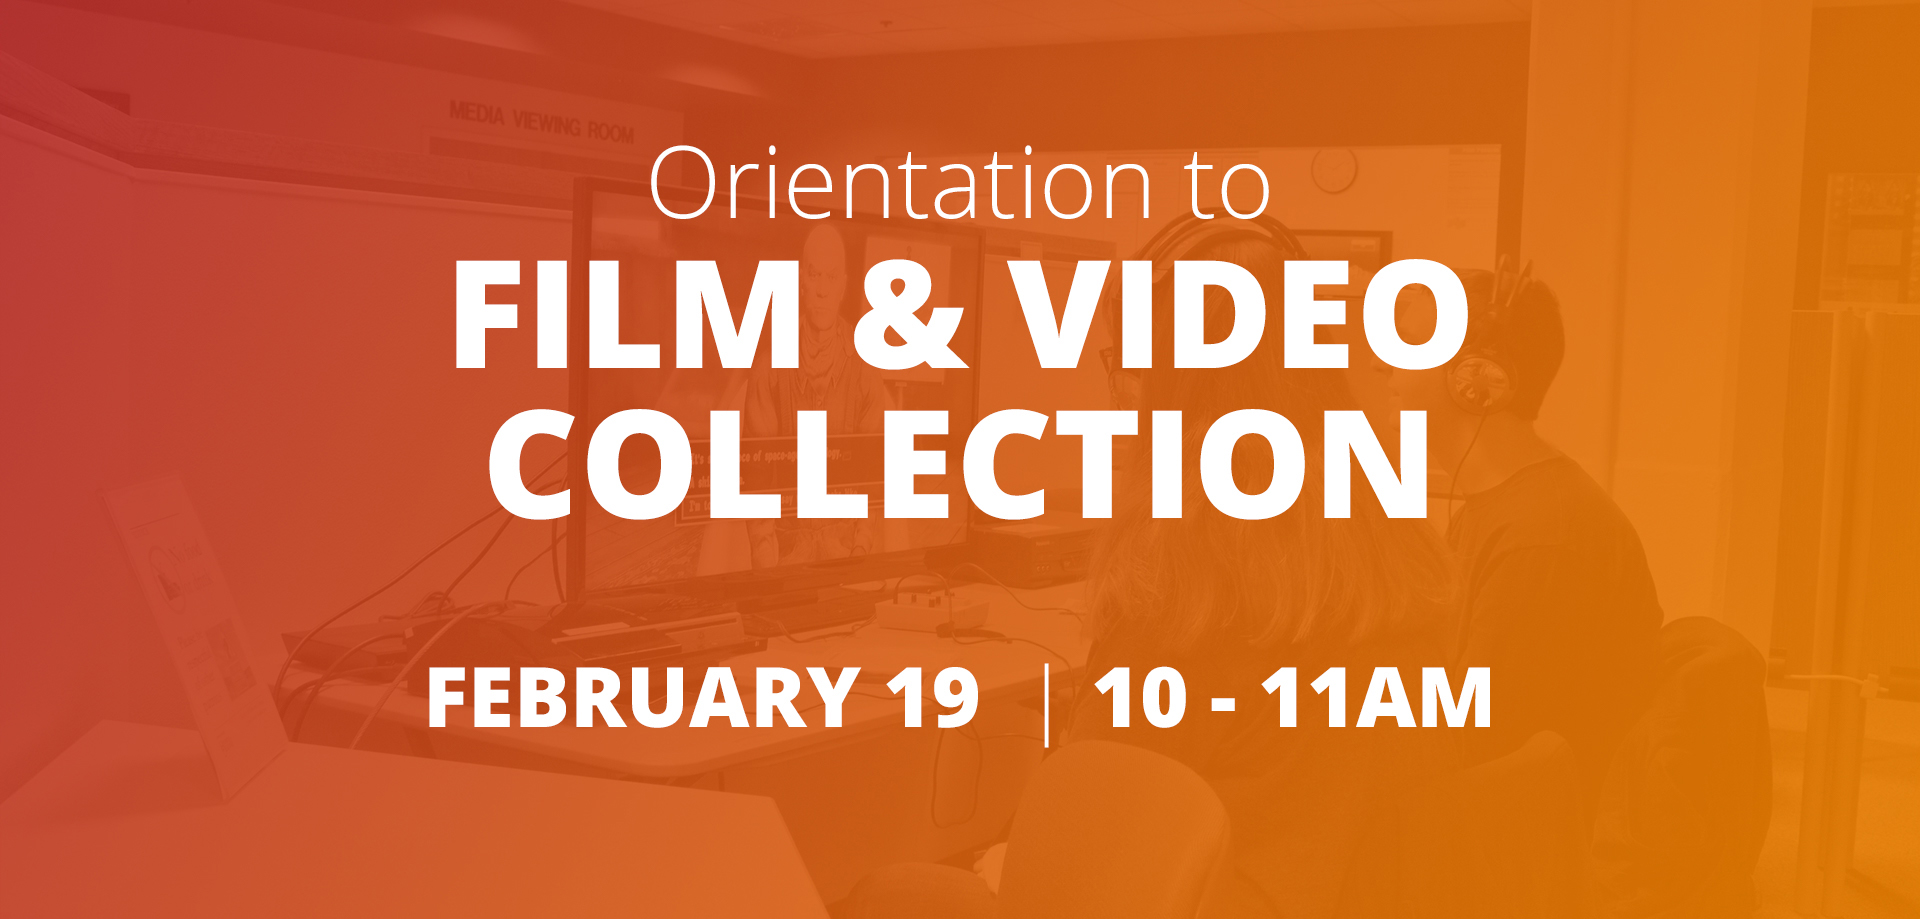 Orientation to Film & Video Collection